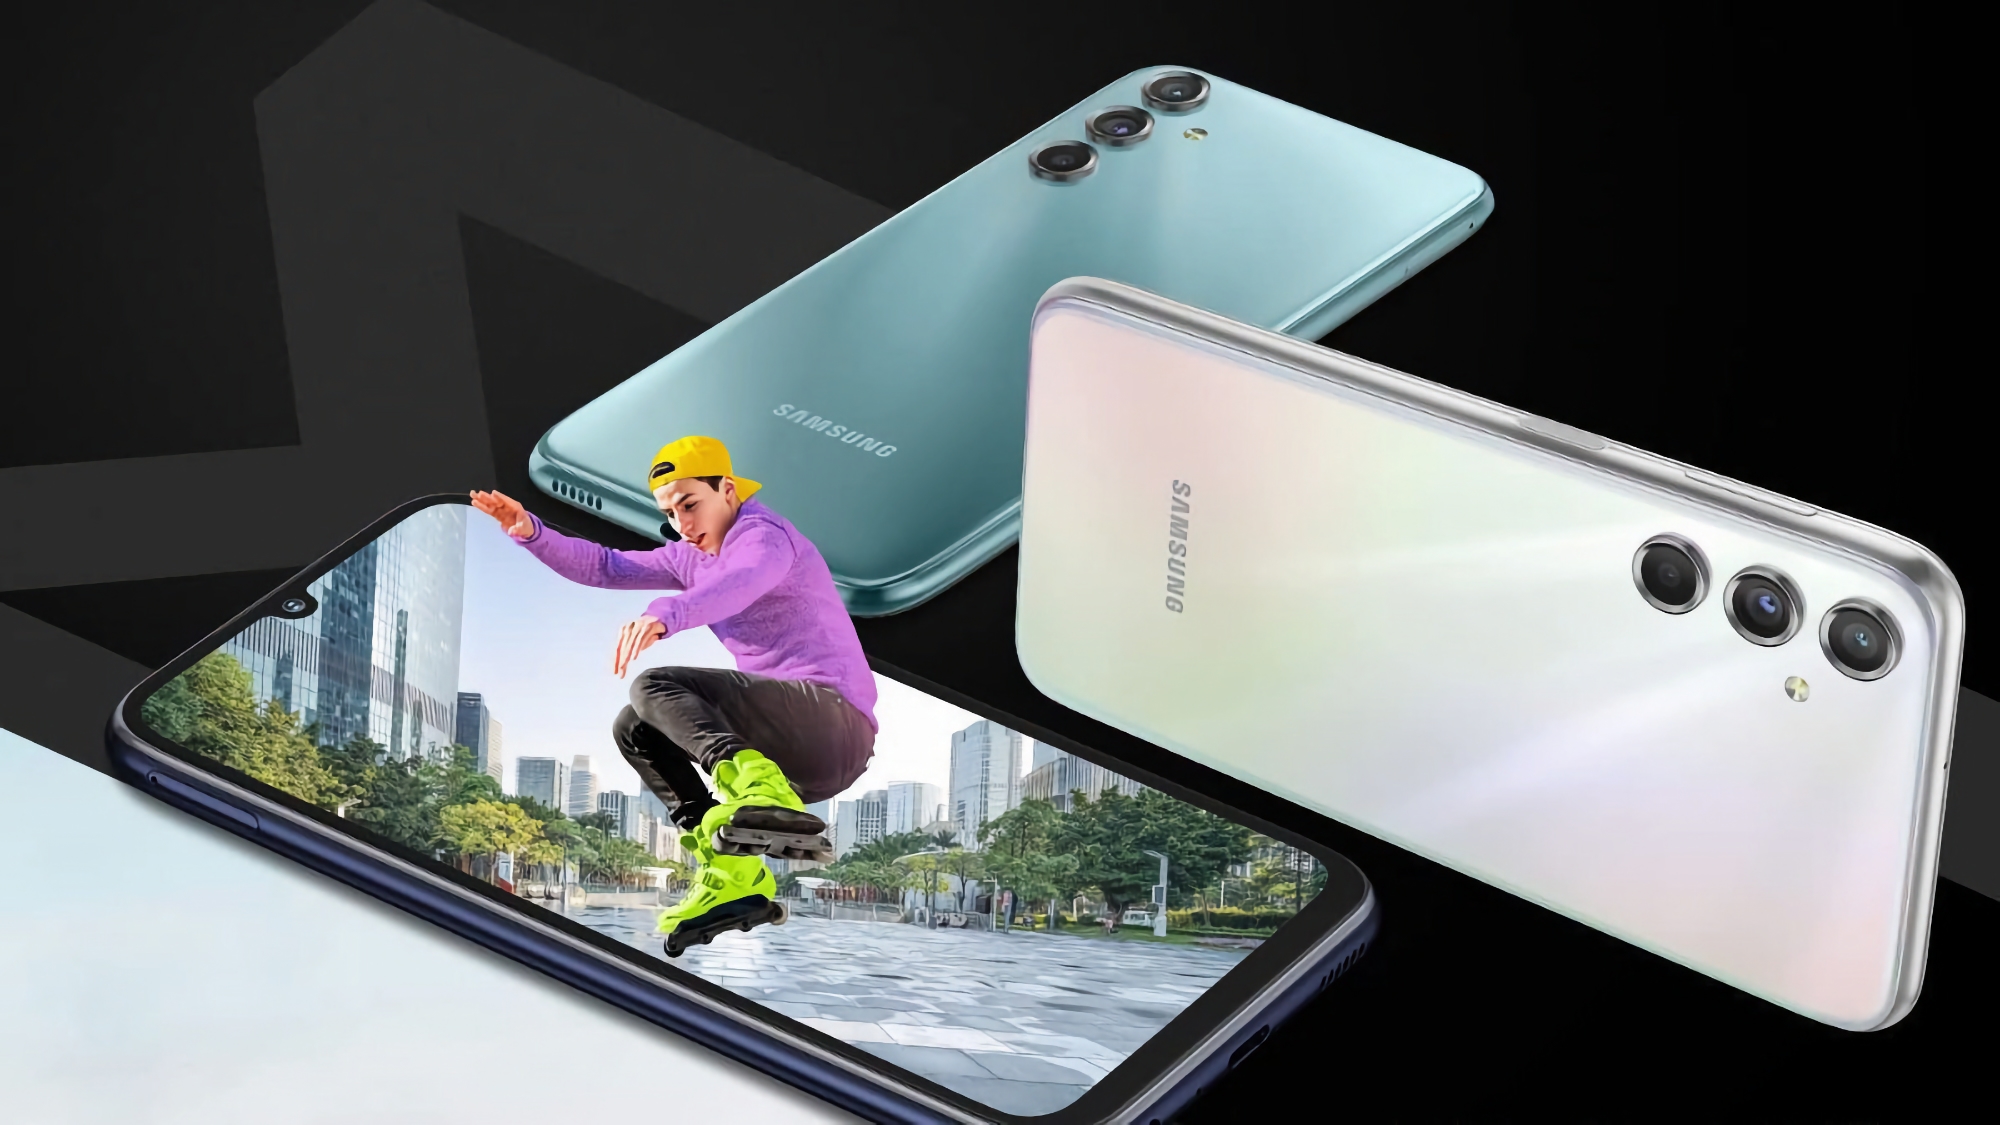 Samsung is working on a Galaxy M44 5G smartphone with Snapdragon 888 chip and 6GB RAM